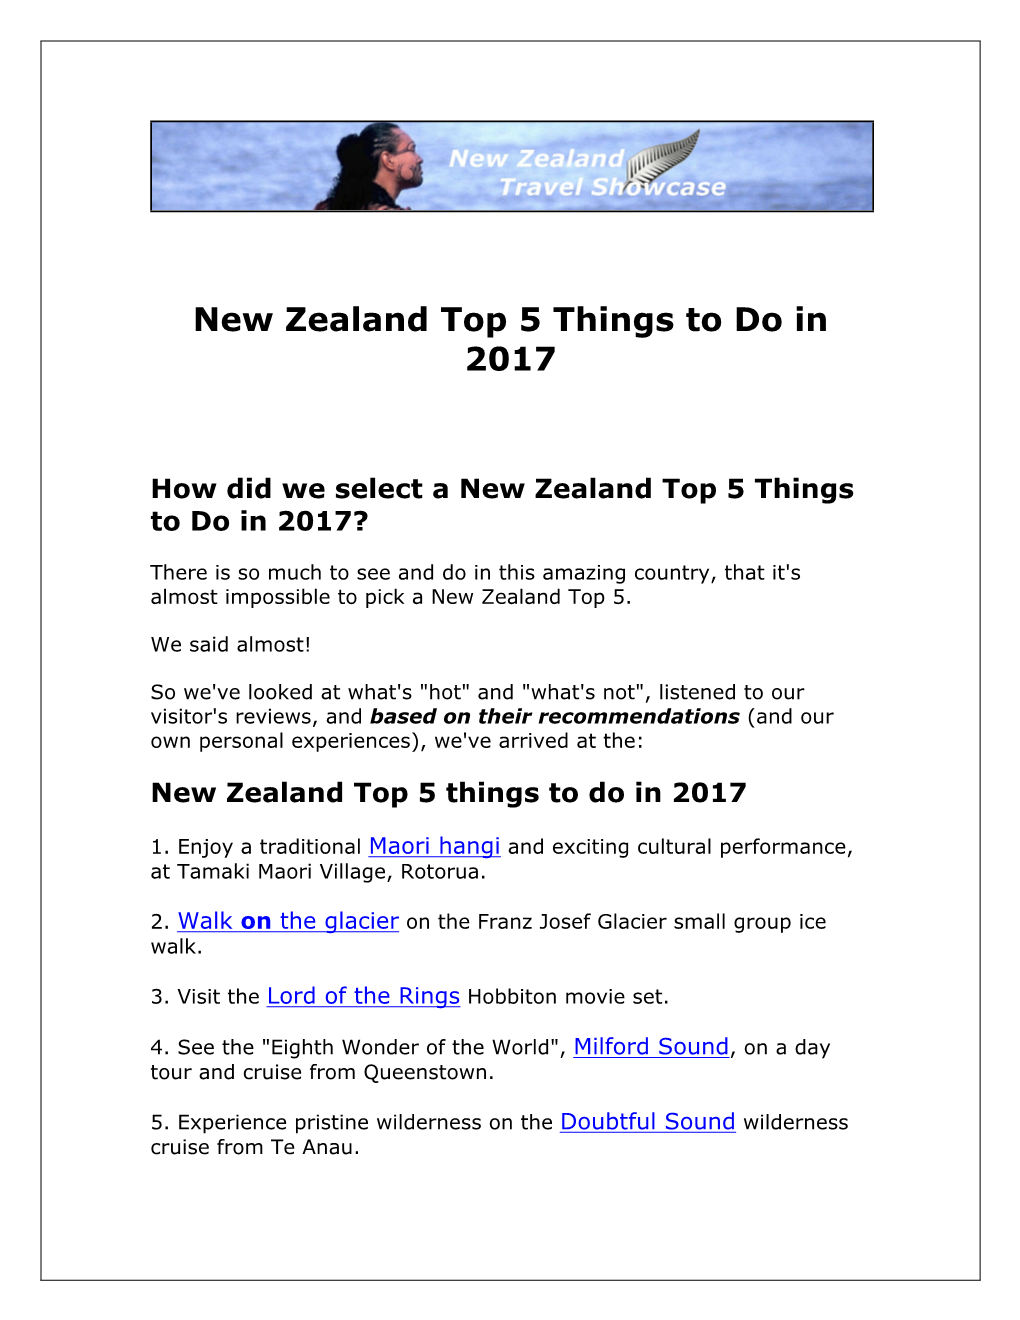 New Zealand Top 5 Things to Do in 2017